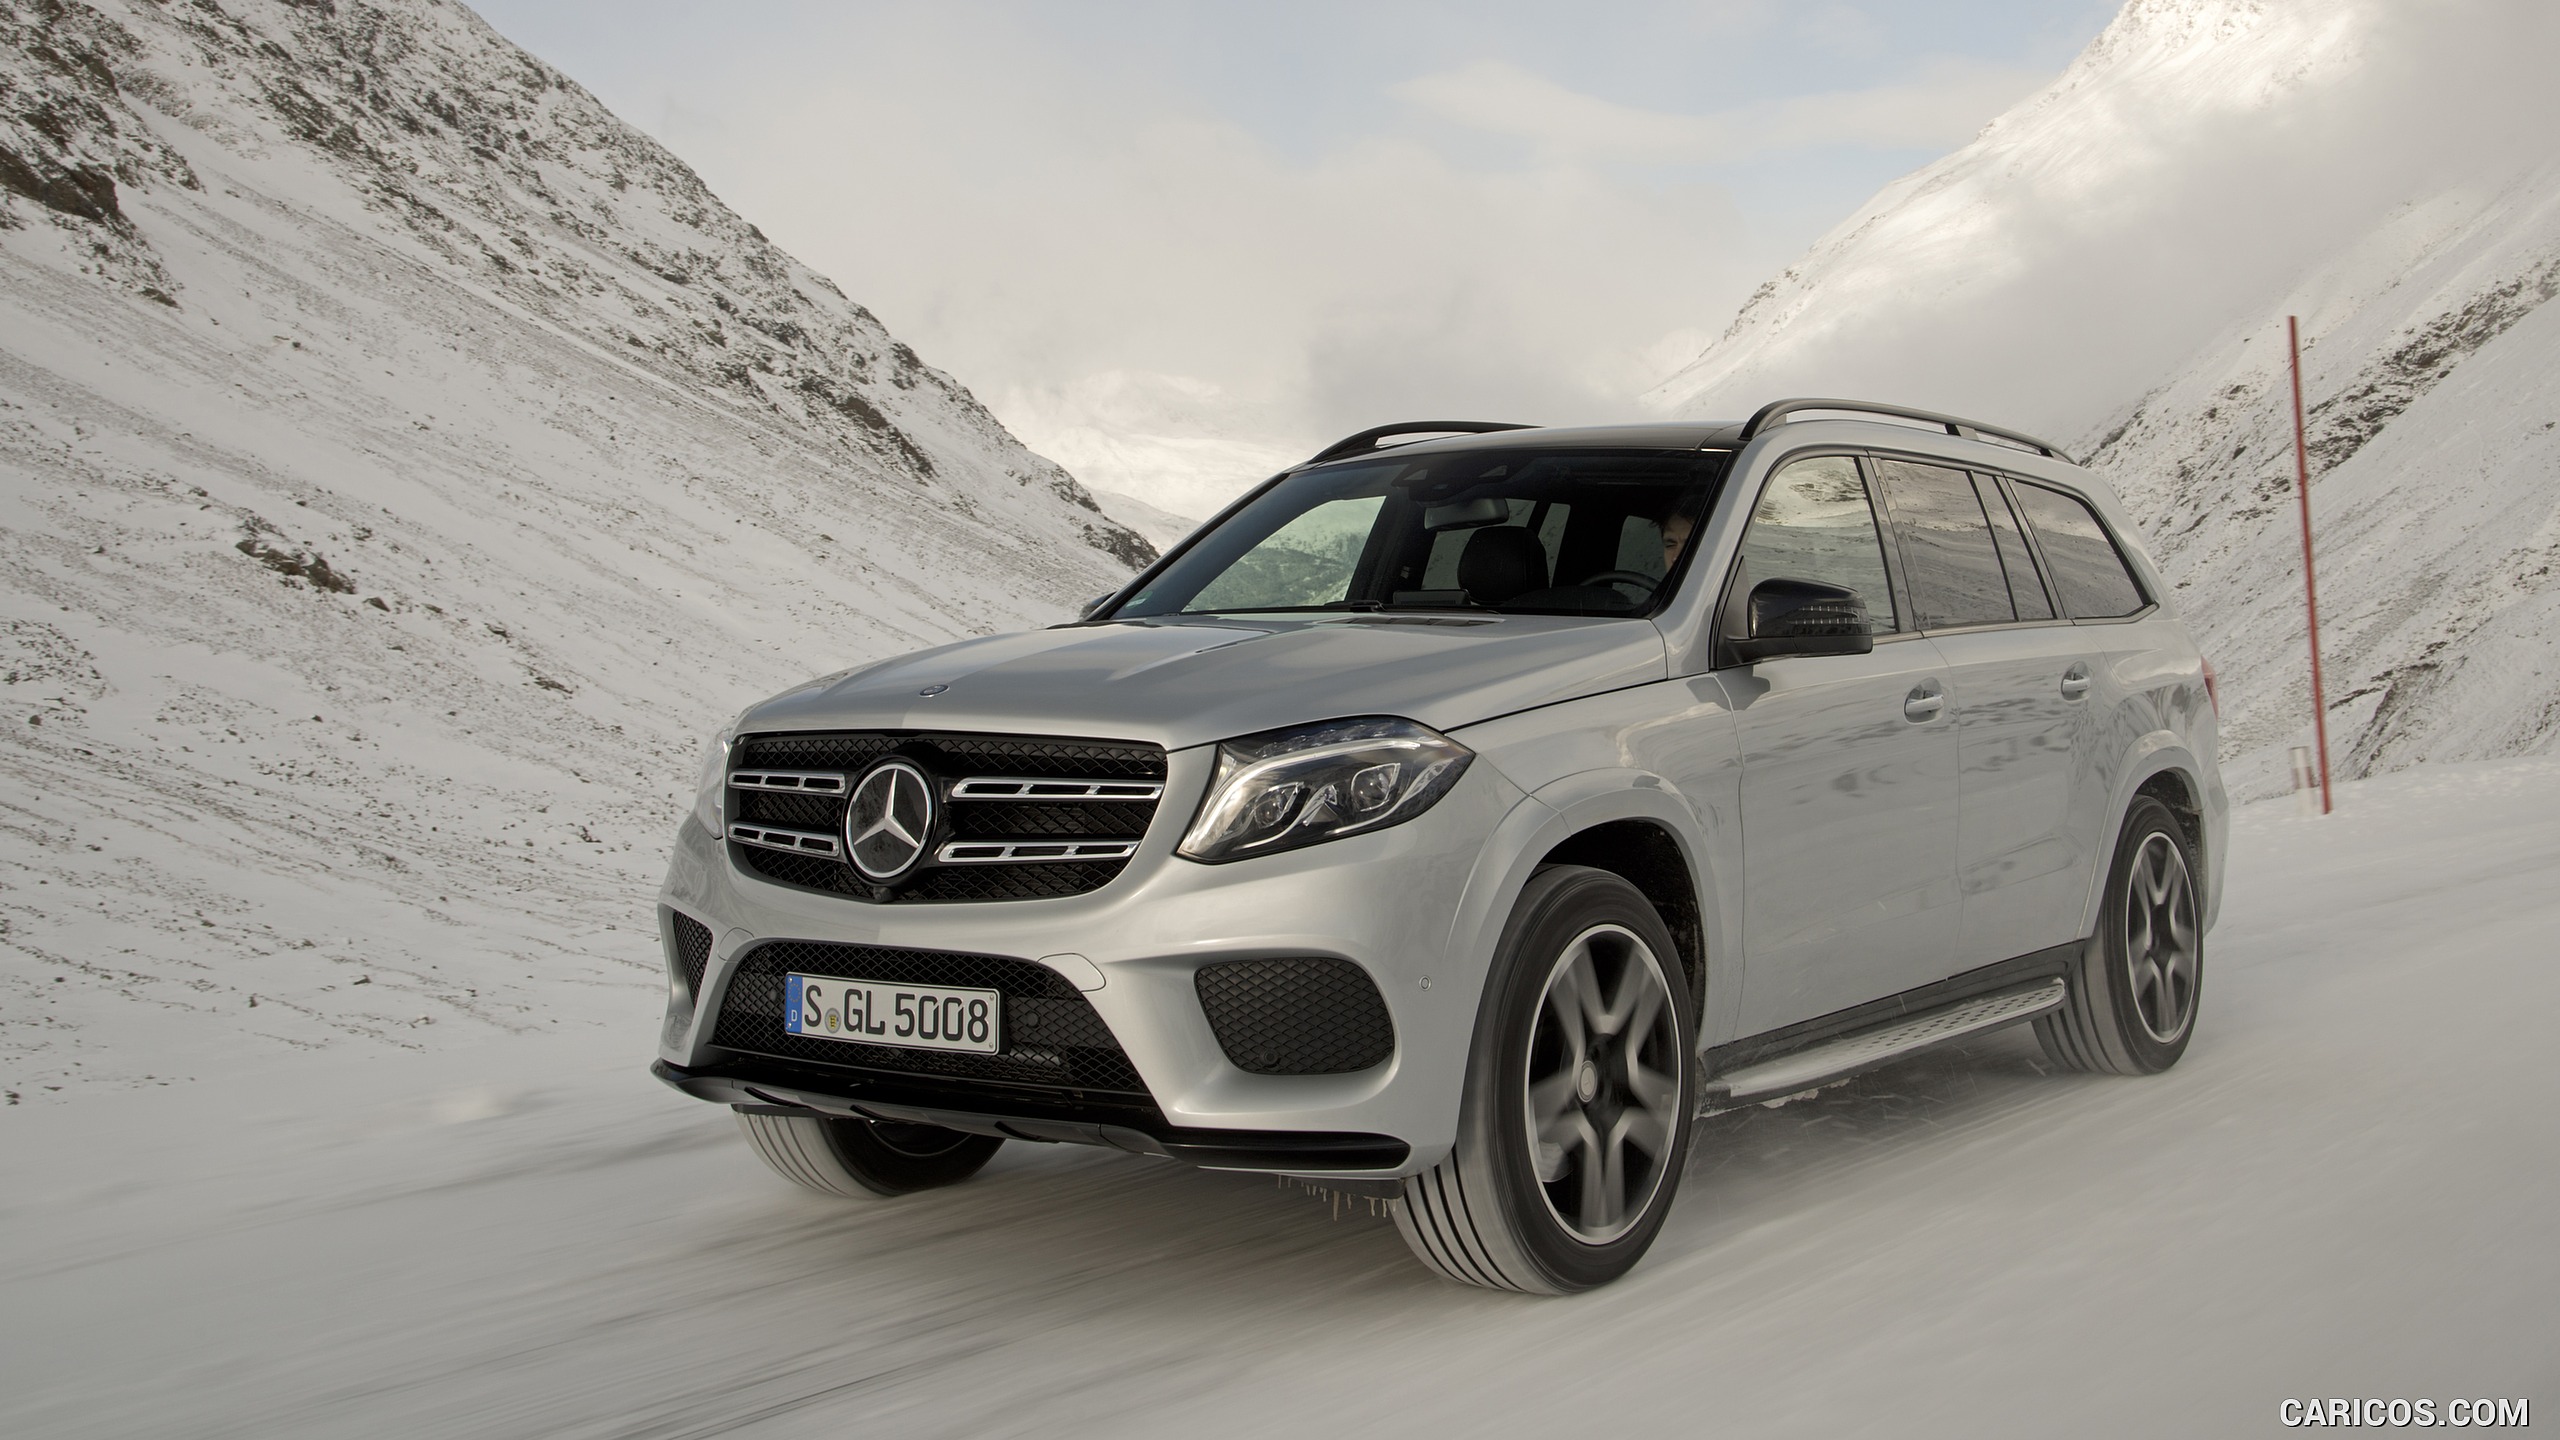 2017 Mercedes-Benz GLS 500 4MATIC AMG Line in Snow - Front, #137 of 255